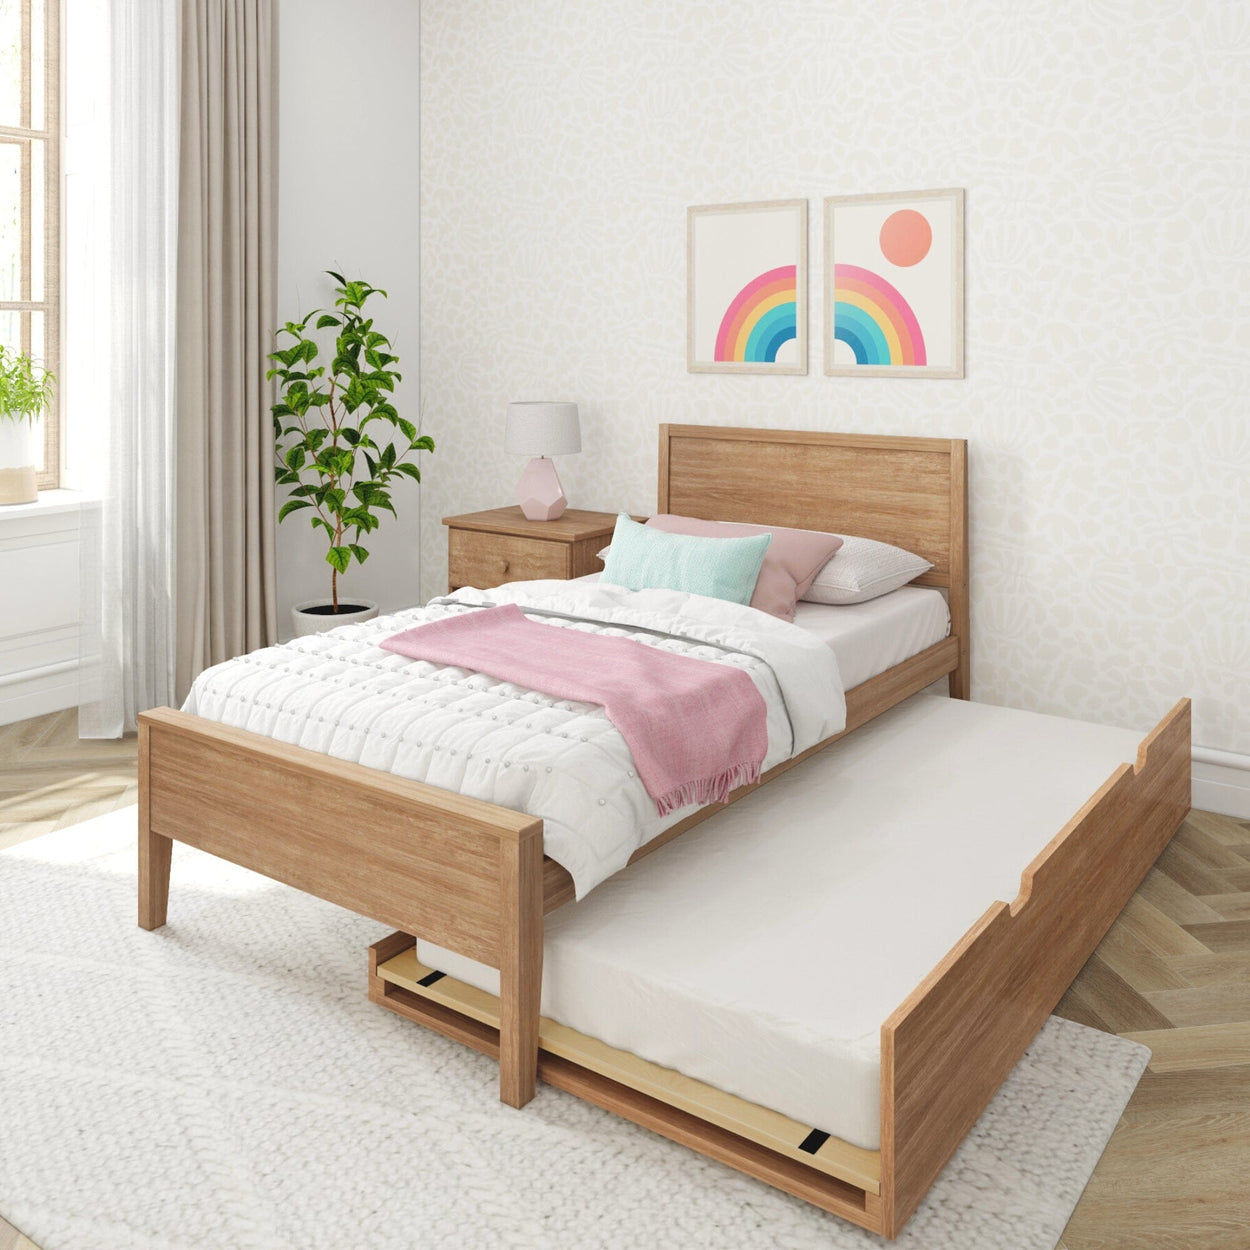 186100-007 : Kids Beds Classic Twin-Size Bed with Panel Headboard and Trundle, Pecan